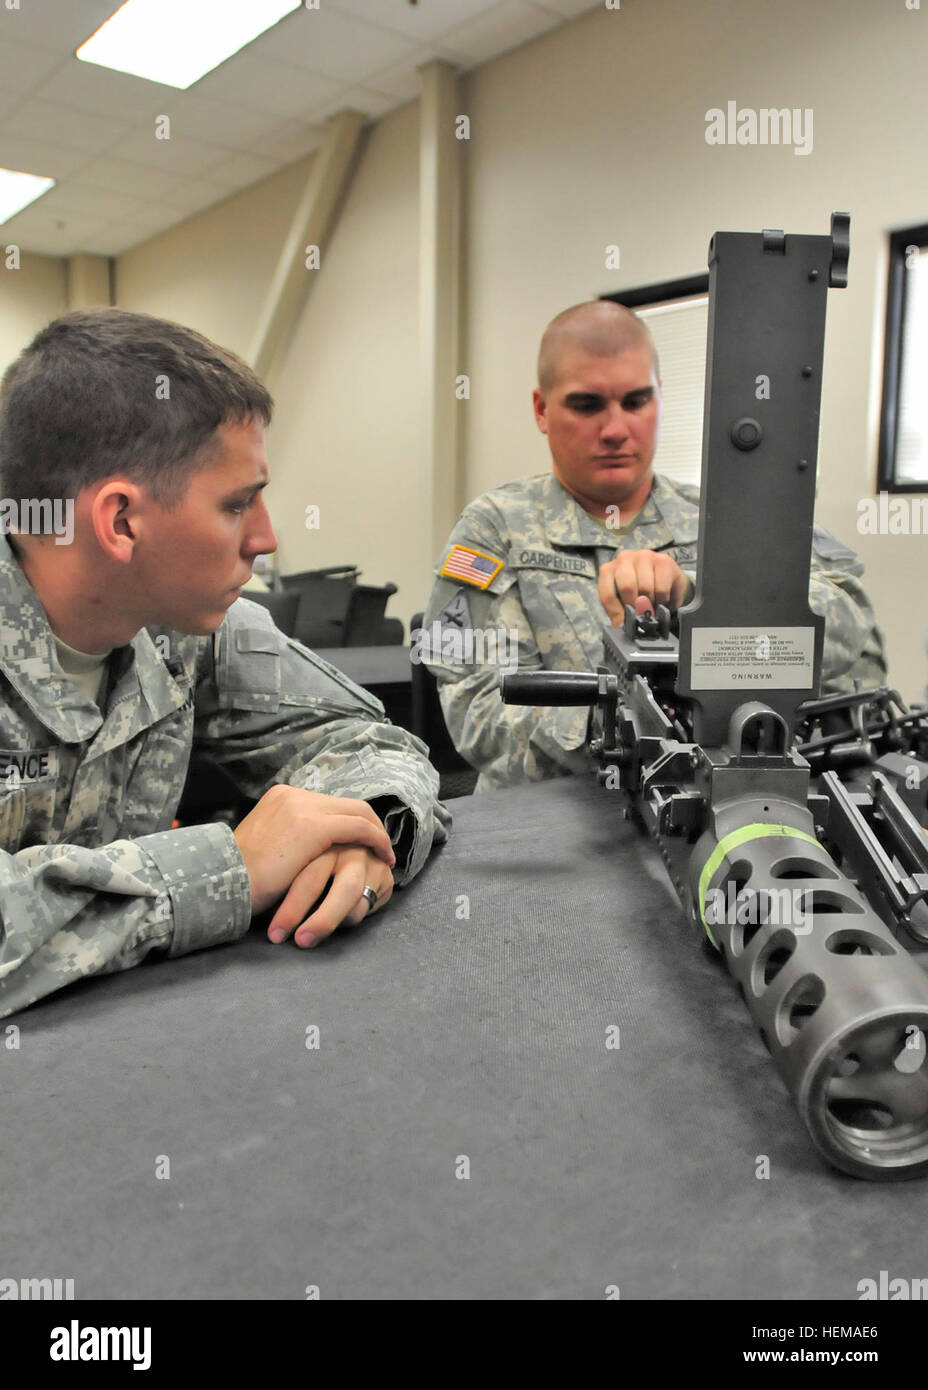 U.S. Army Sgt. Todd Lawrence, (left), a native of Las Cruces, N.M., and infantryman assigned to Company A, 1st Battalion, 77th Infantry Regiment, 4th Heavy Brigade Combat Team, 1st Armored Division, watches as Spc. Zachary Carpenter, a native of Callisburg, Texas, and infantryman assigned to 5th Infantry Regiment, 2nd Battalion, 3rd Infantry Brigade Combat Team, 1st Armored Division, both based out of Fort Bliss, Texas, practices taking apart an M2 heavy machine gun. Service members who attend the unit armorer course held at the troop school on Biggs Army Airfield are taught how to properly ma Stock Photo